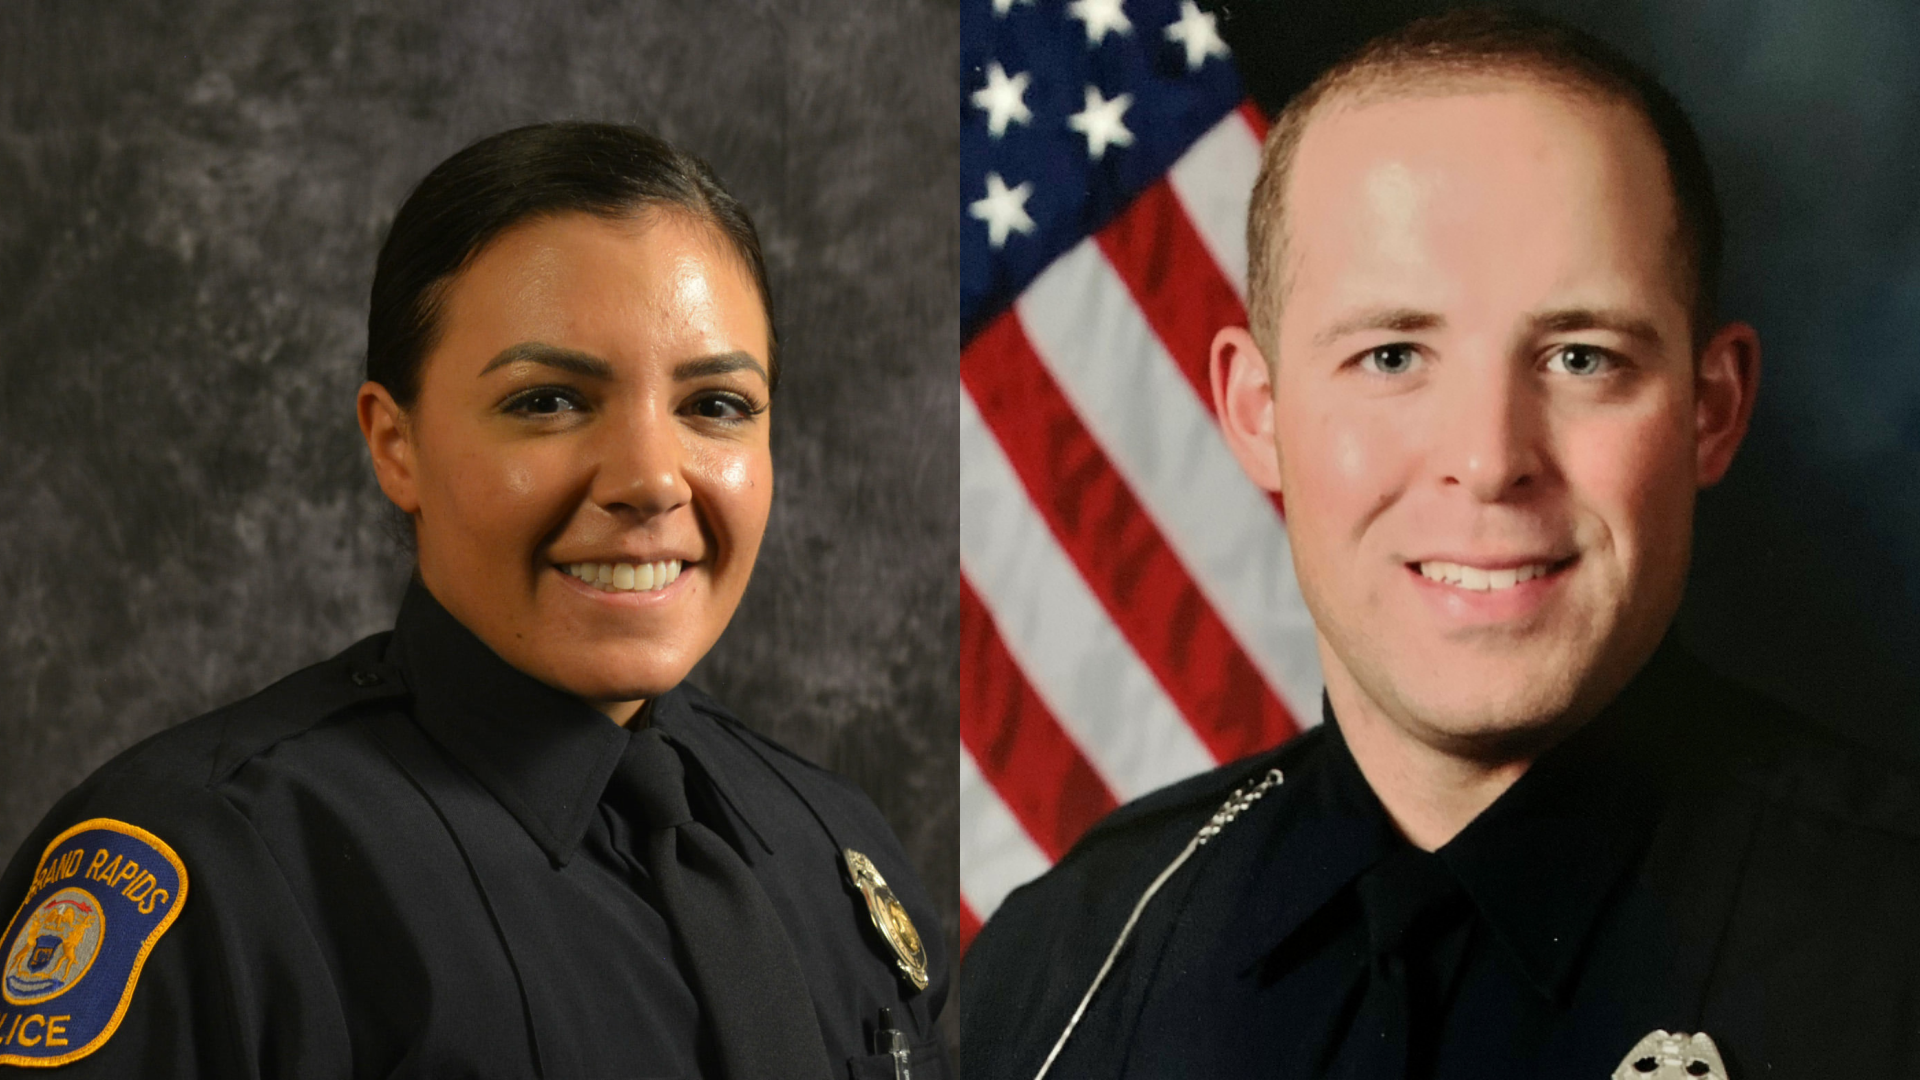 Two Grand Rapids Police officers are being recognized for their quick action in saving an infant's life.